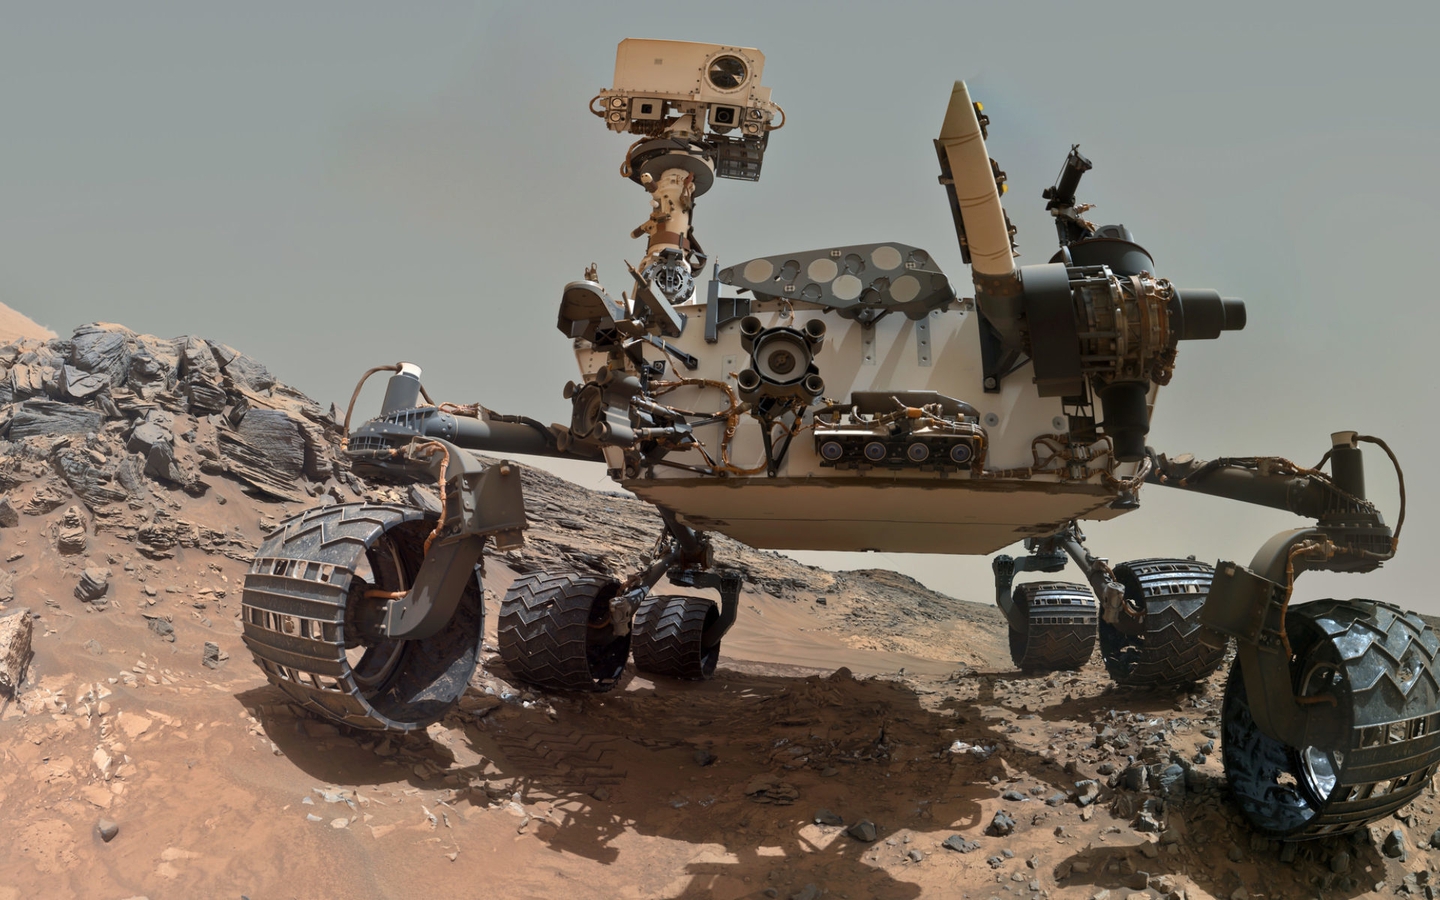 Image: Curiosity, Mars Rover, technology, surface, stones